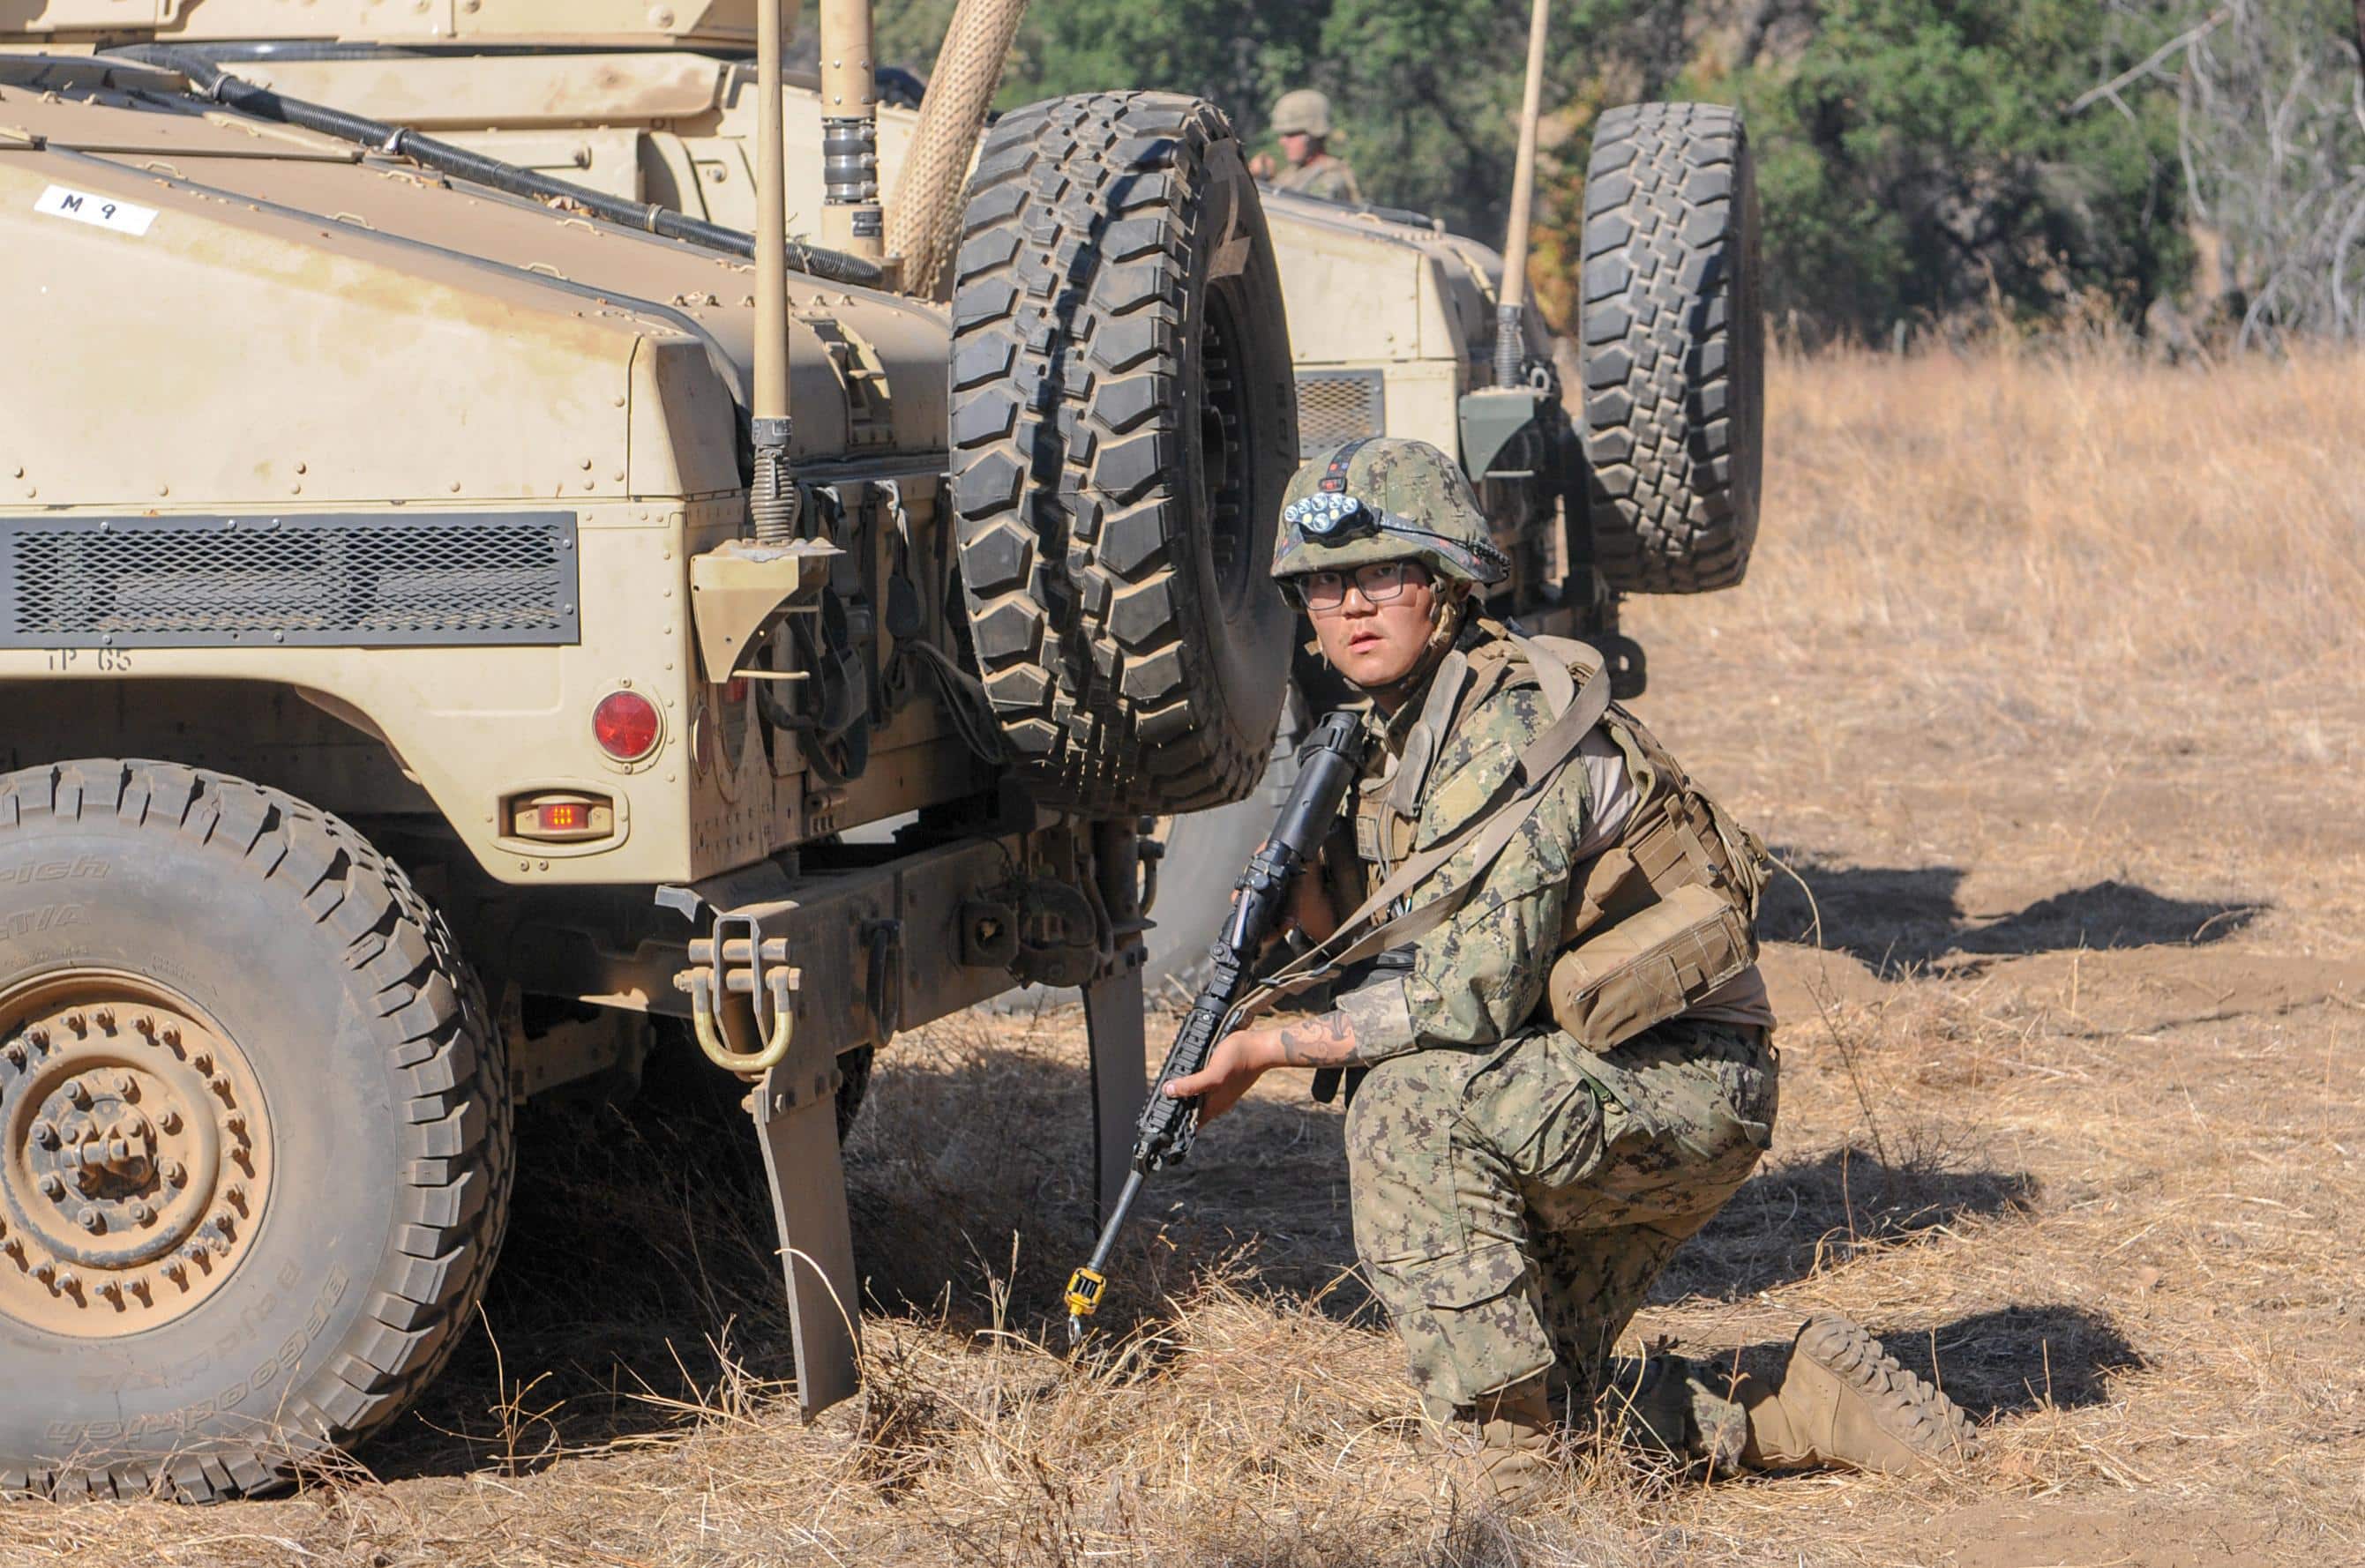 191113-N-TP832-1100 FORT HUNTER LIGGETT, Calif. (Nov. 13, 2019) Construction Electrician 3rd Class Wenheng Zhao, assigned to Naval Mobile Construction Battalion (NMCB) 3, uses an M4 rifle to defend an entry control point from a simulated enemy attack during NMCB-3’s field training exercise (FTX) at Fort Hunter Liggett, Calif.